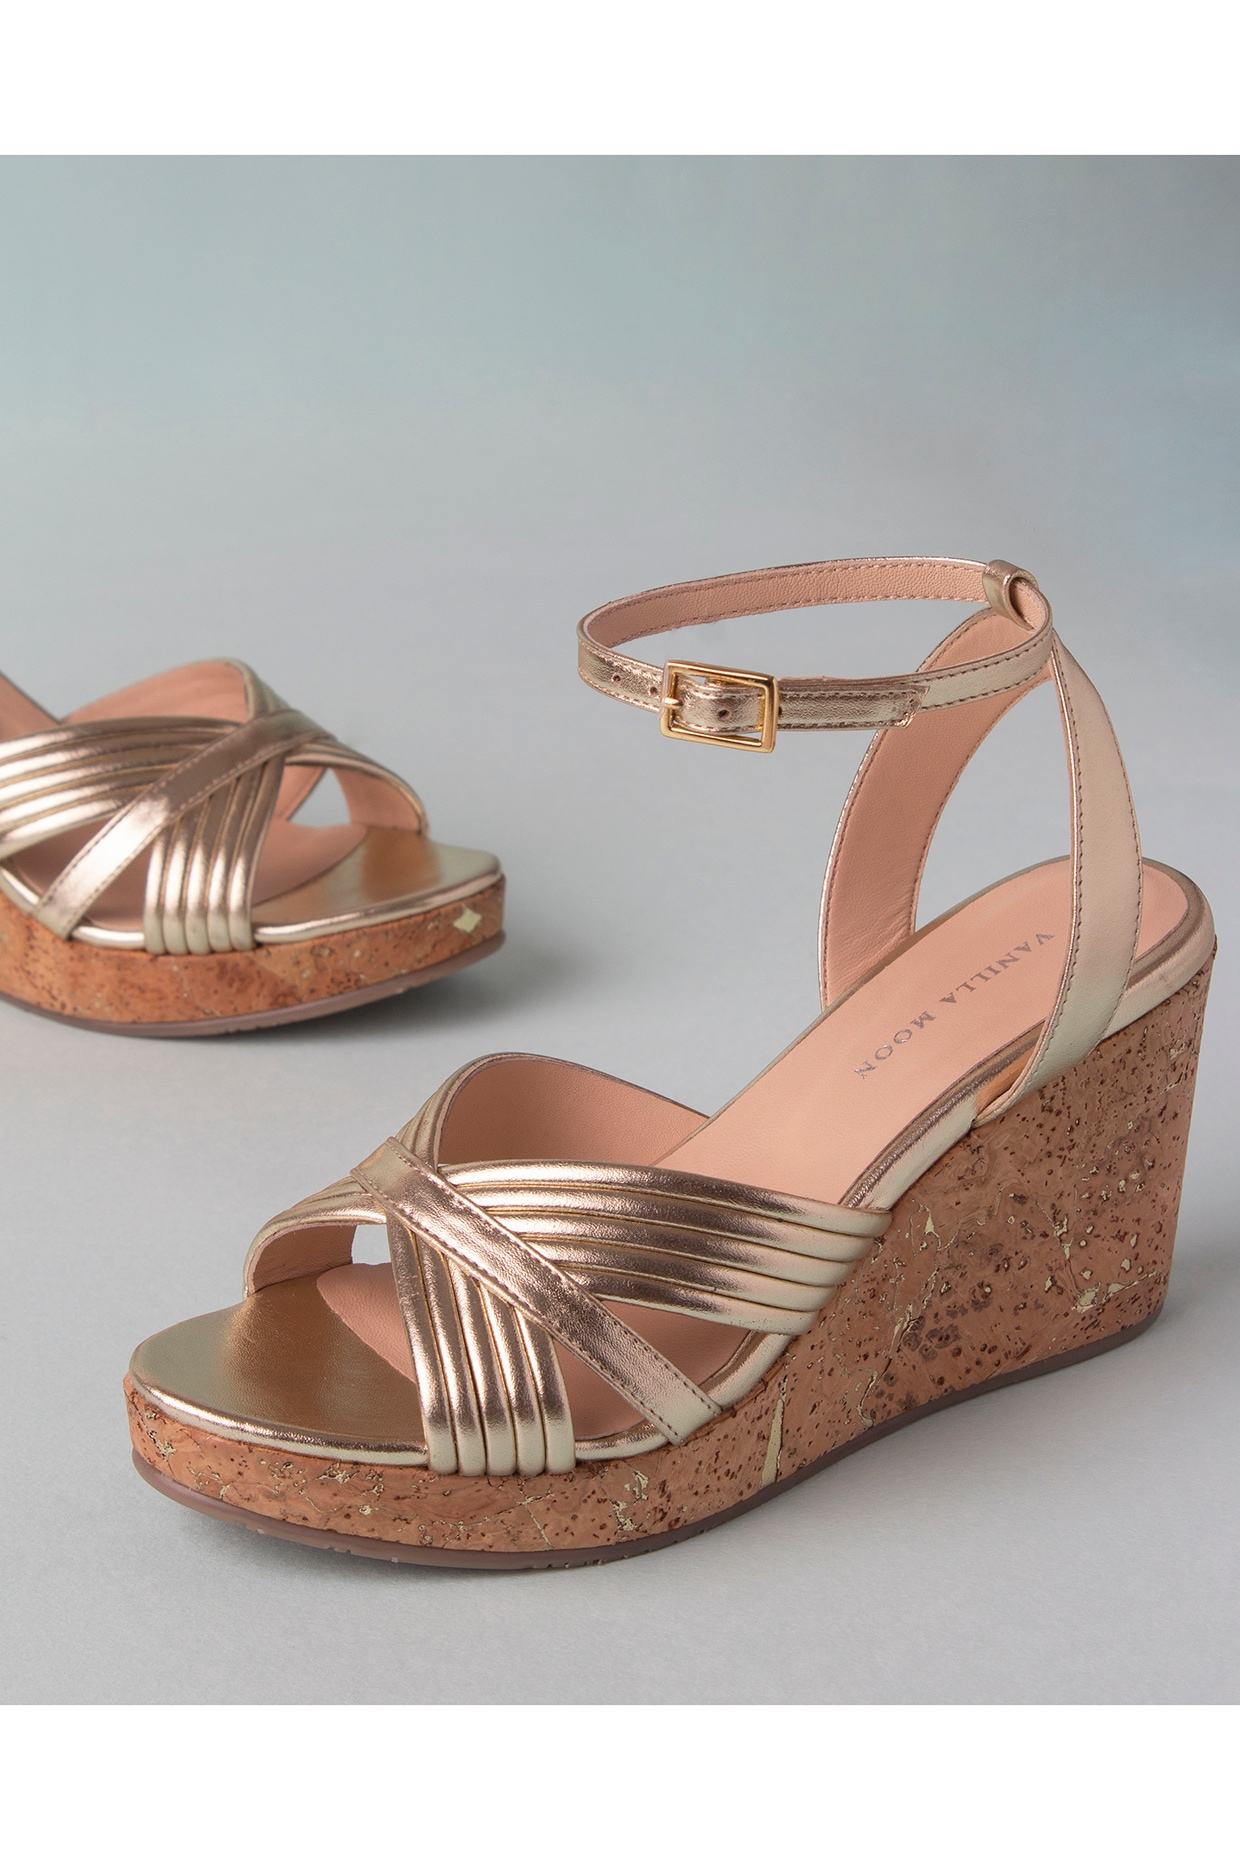 Be My Darlin' Metallic Wedges - Frock Candy